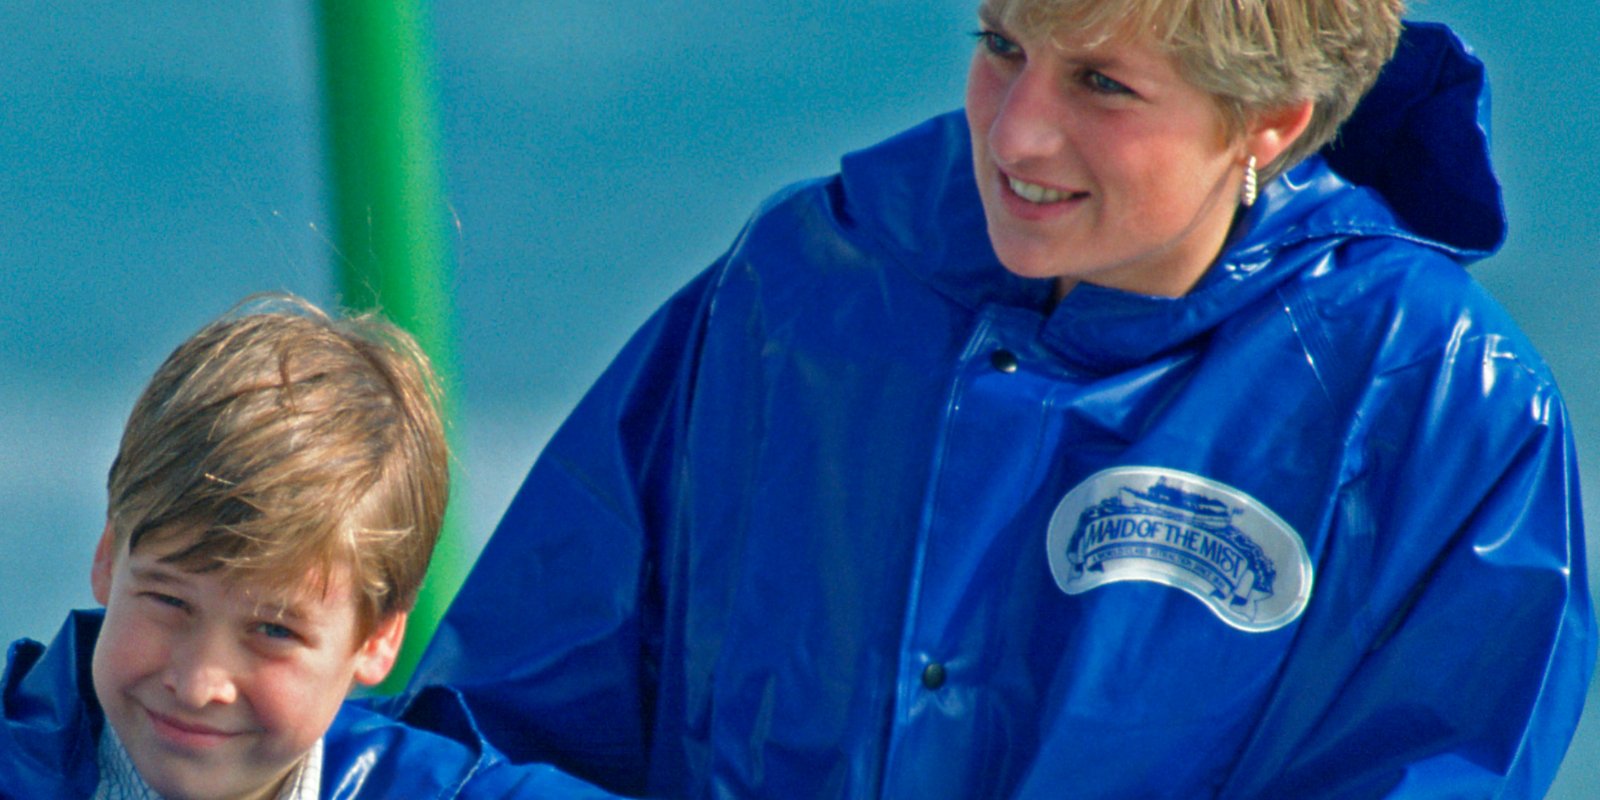 Prince William and Princess Diana in a photo taken on the Maid of the Mist at Niagra Falls in Toronto, Canada.